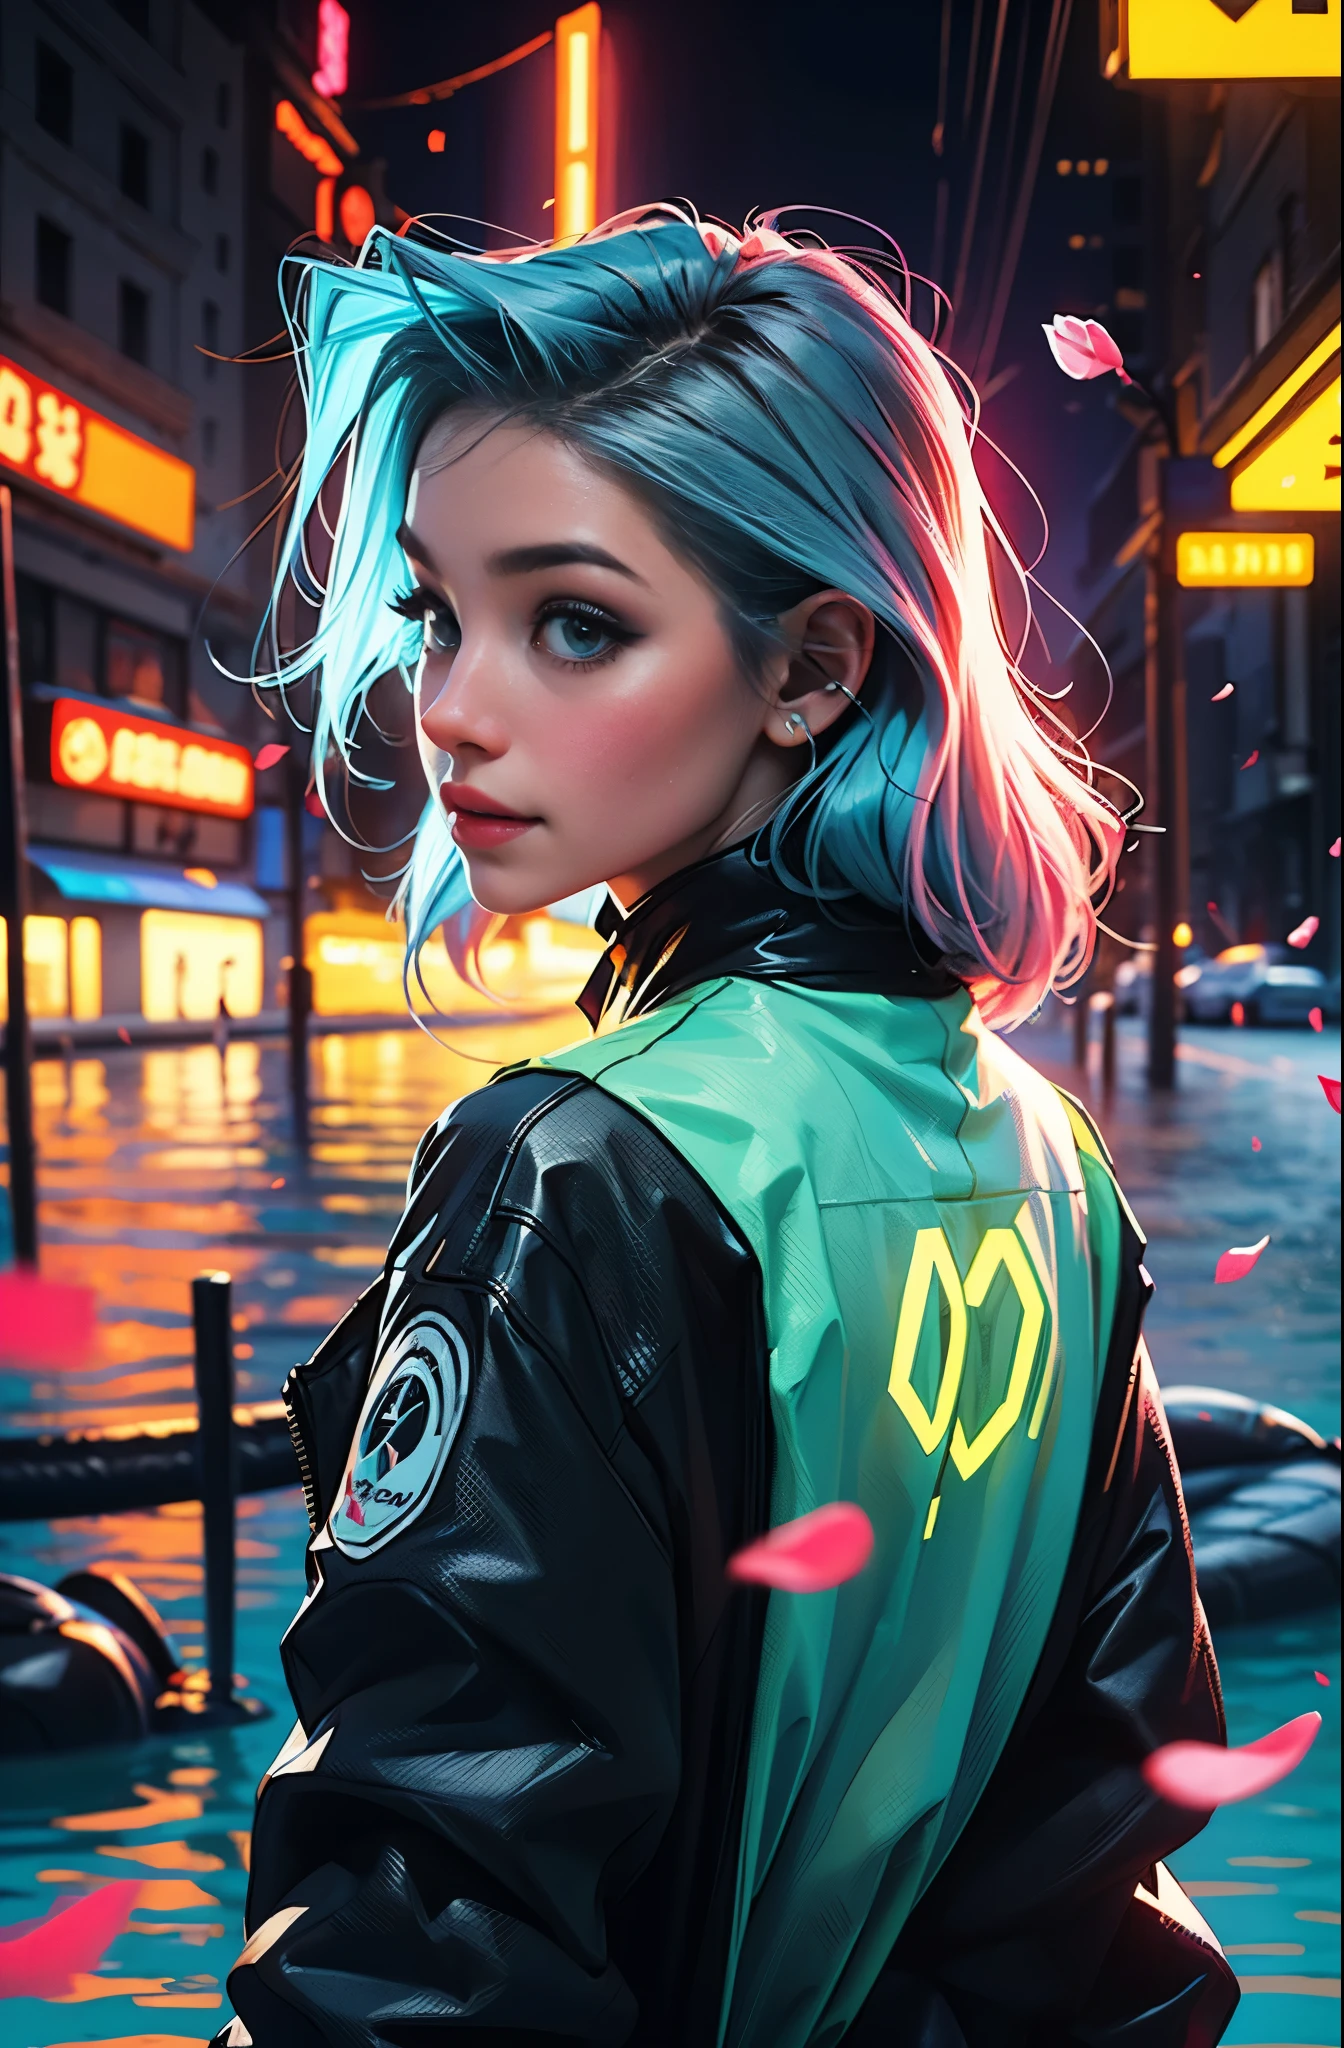 cyberpunk female woman wearing (turquoise Jacket with chromatic accents:1.1), sleek pink and White full bodysuit, side view turning to face camera, (Petal Blush, Lagoon Blue color background:1.3), amazing smile, looking at camera, neon lights 